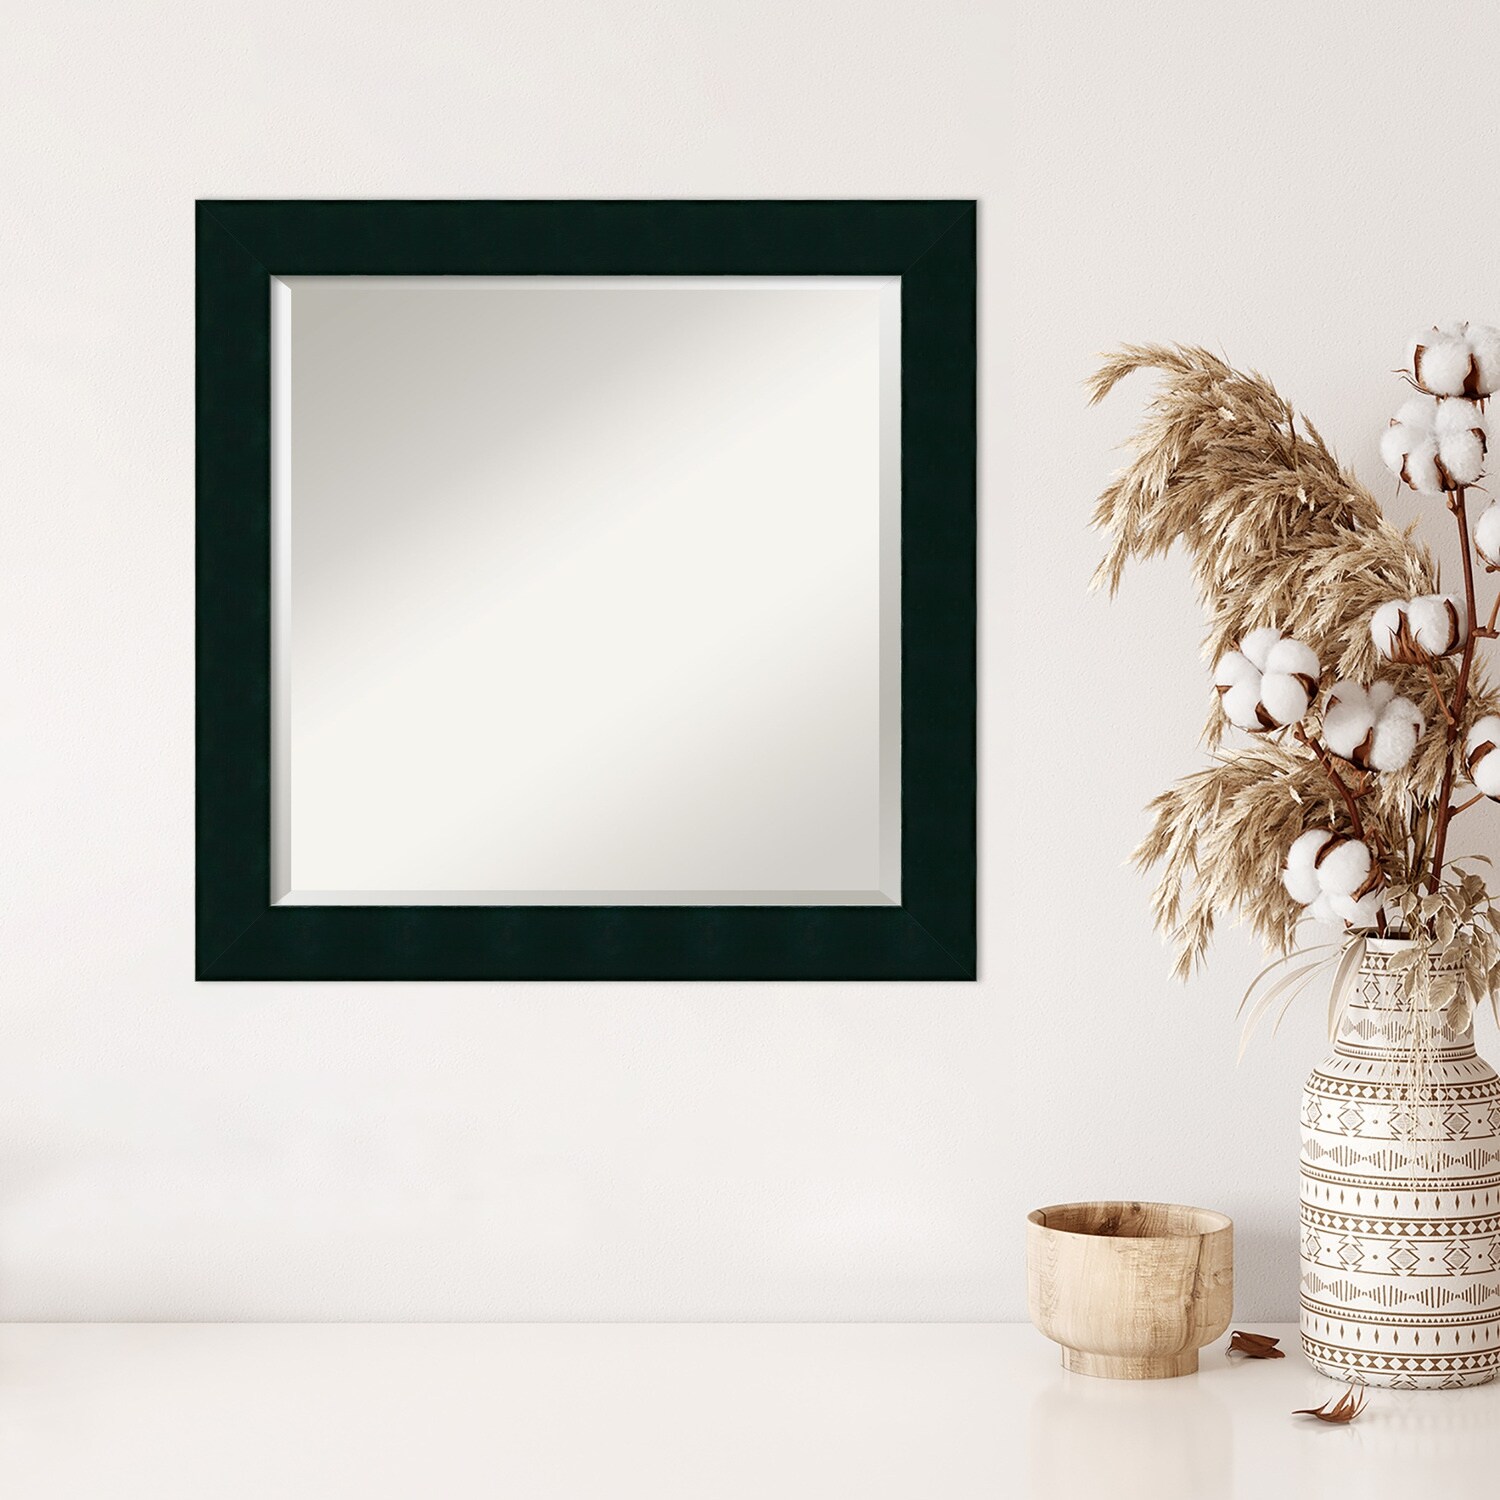 Beveled Wood Wall Mirror - Tribeca Black Frame - Outer Size: 24 x 24 in